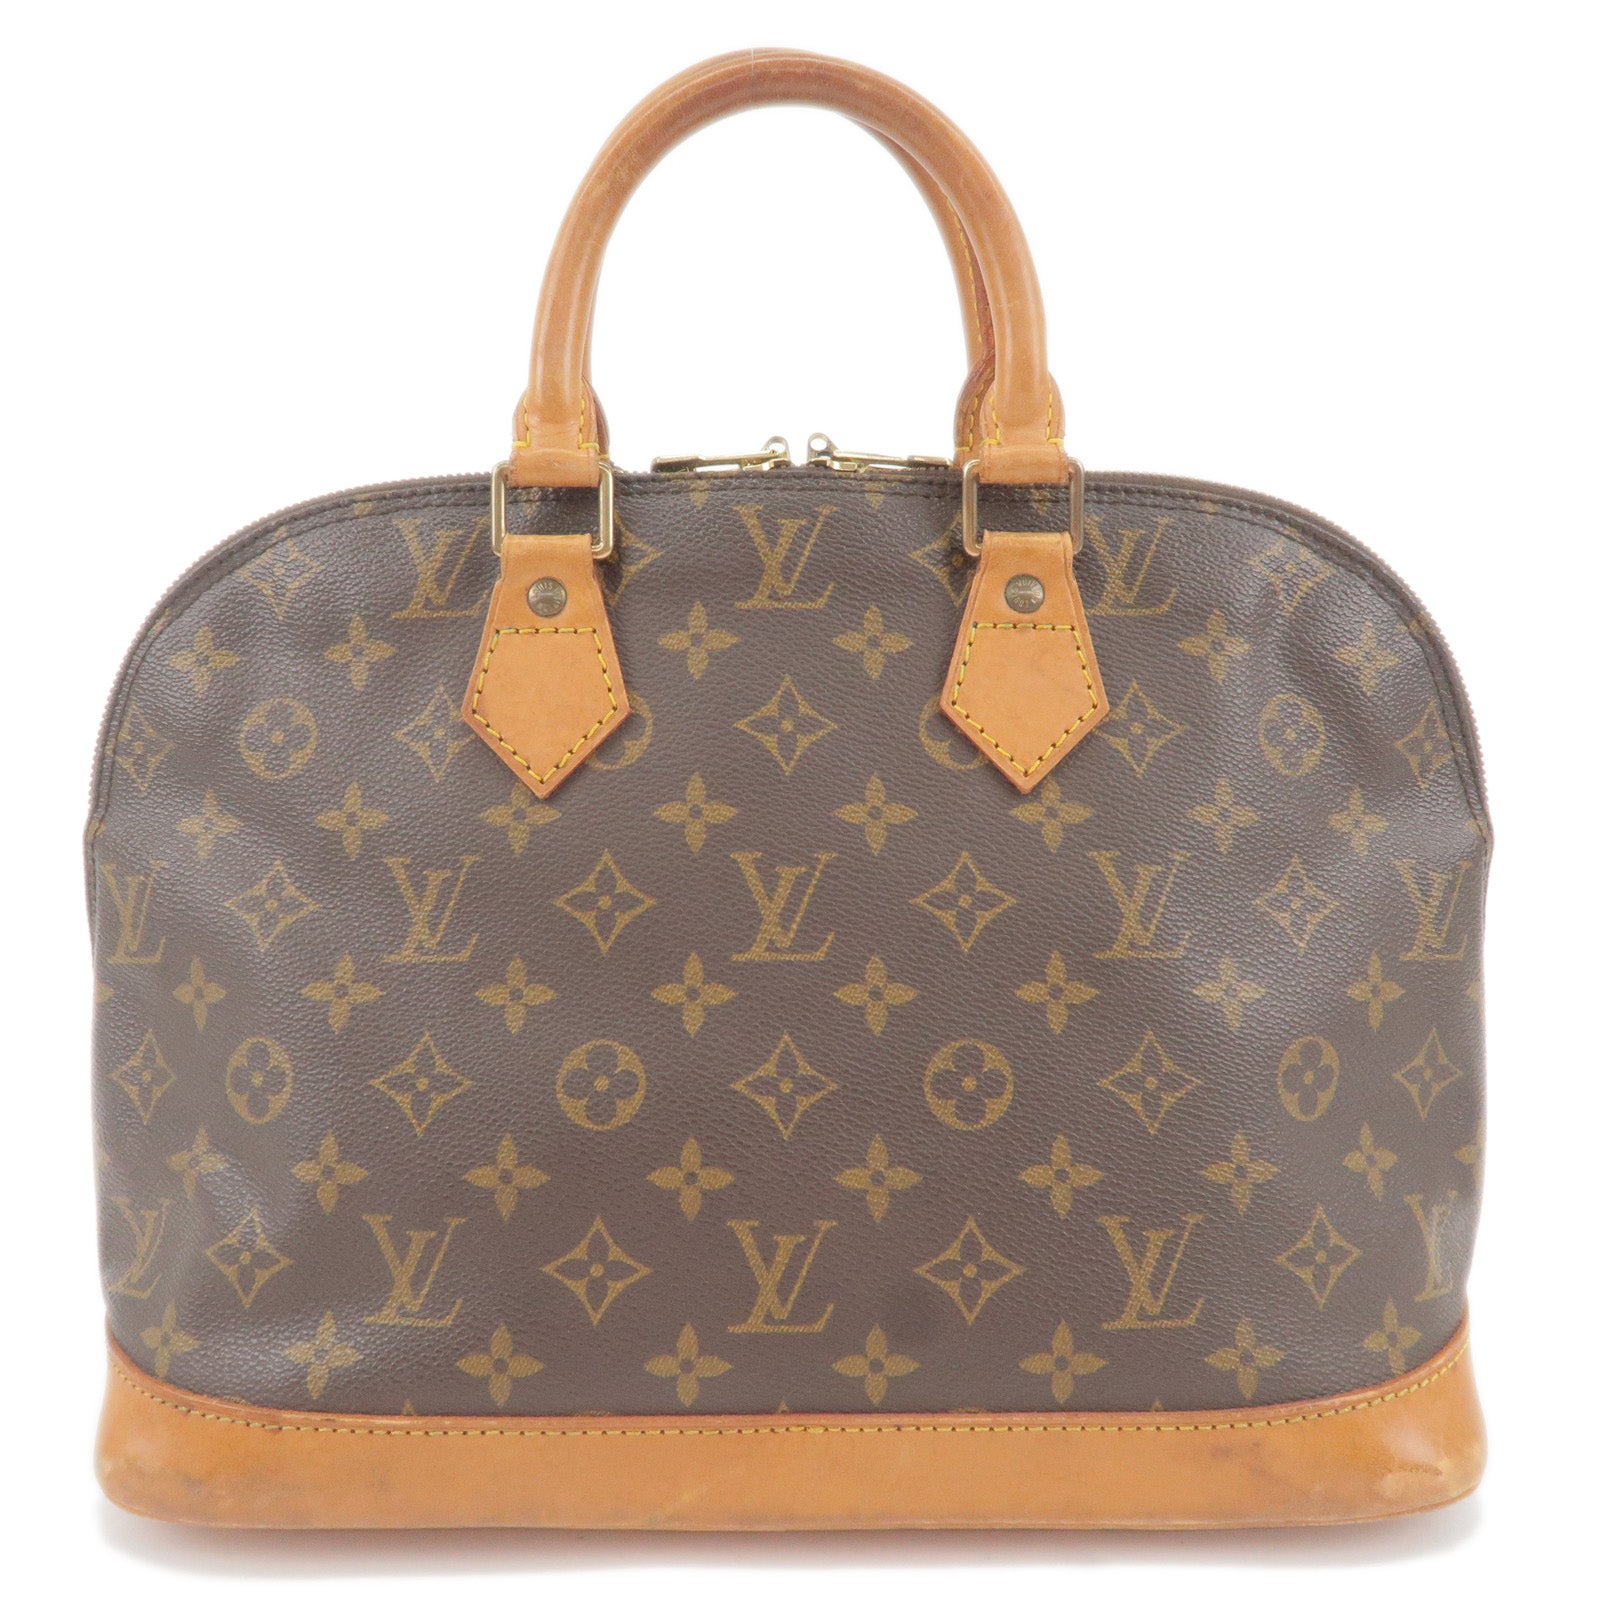 Louis Vuitton - Alma Bag water stain and some scratches!